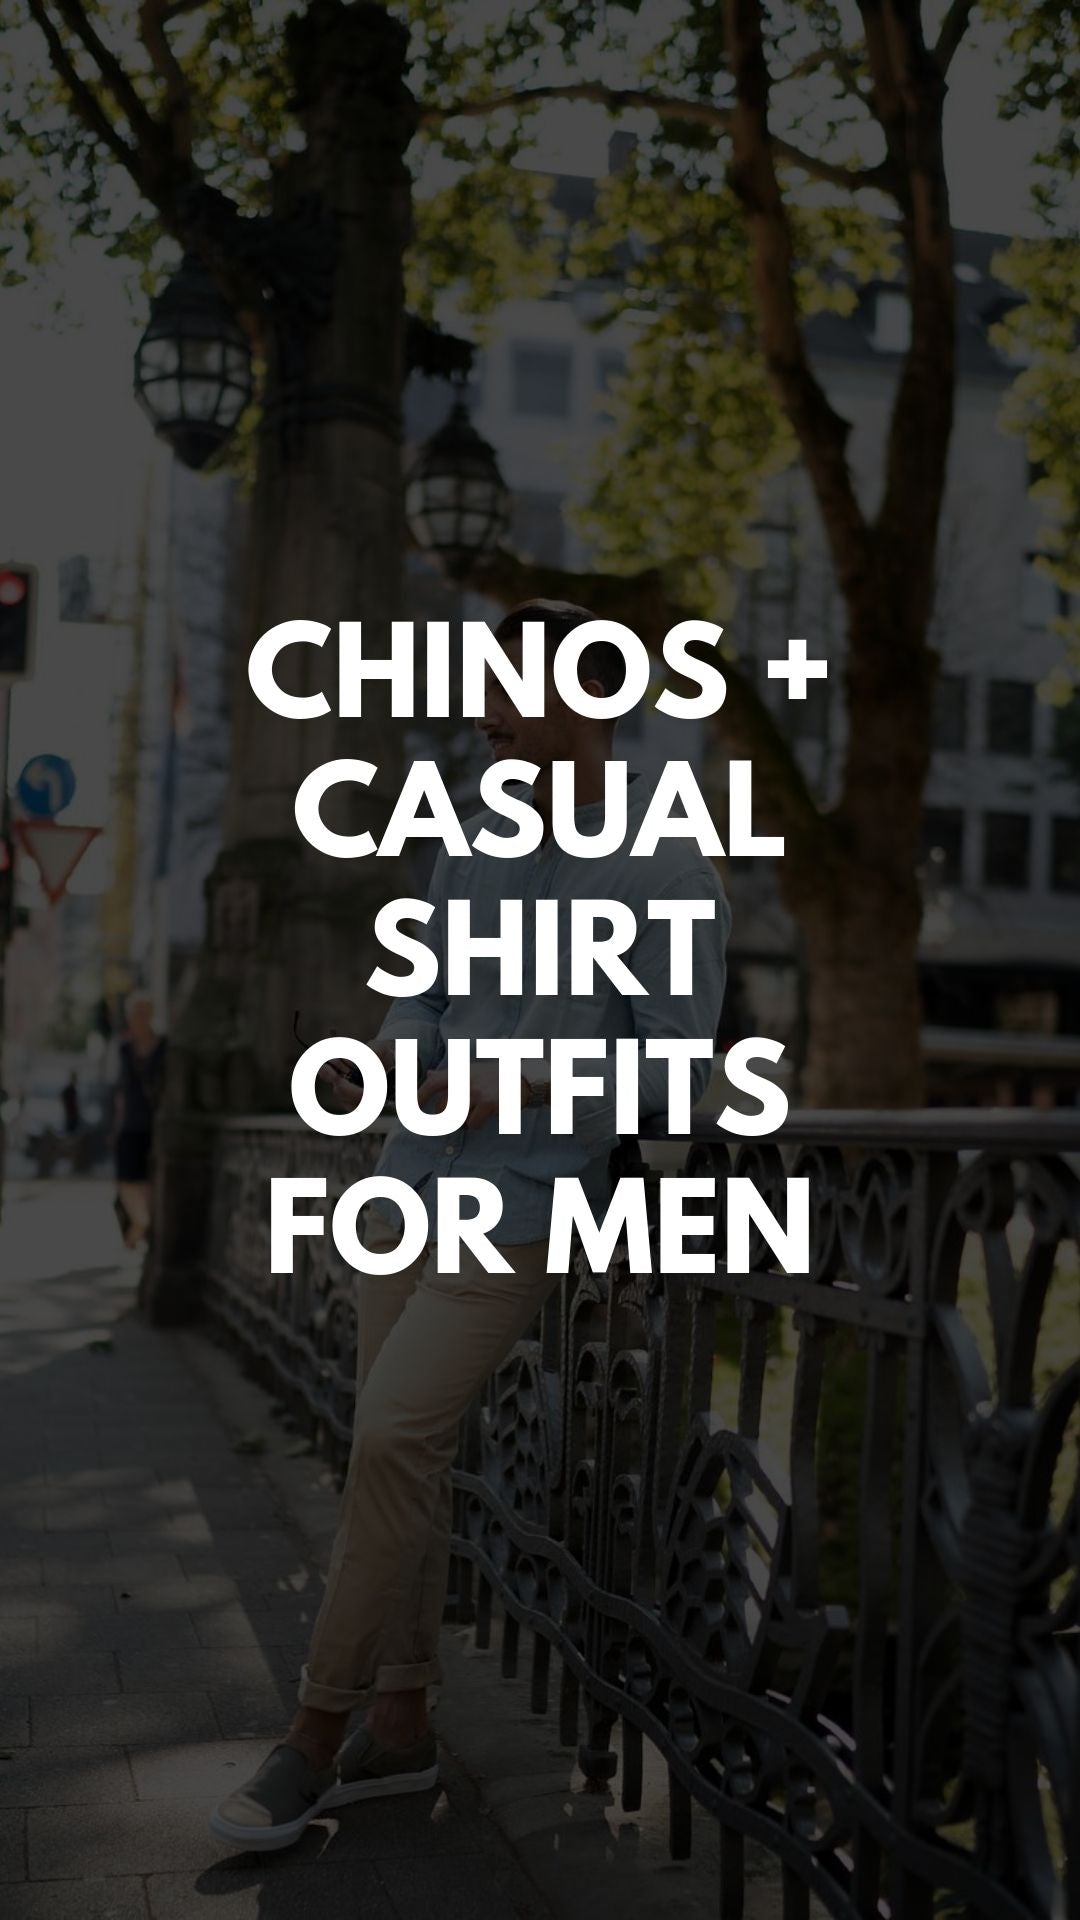 Chinos + Casual Shirt Outfits For Men #mensfashion #streetstyle